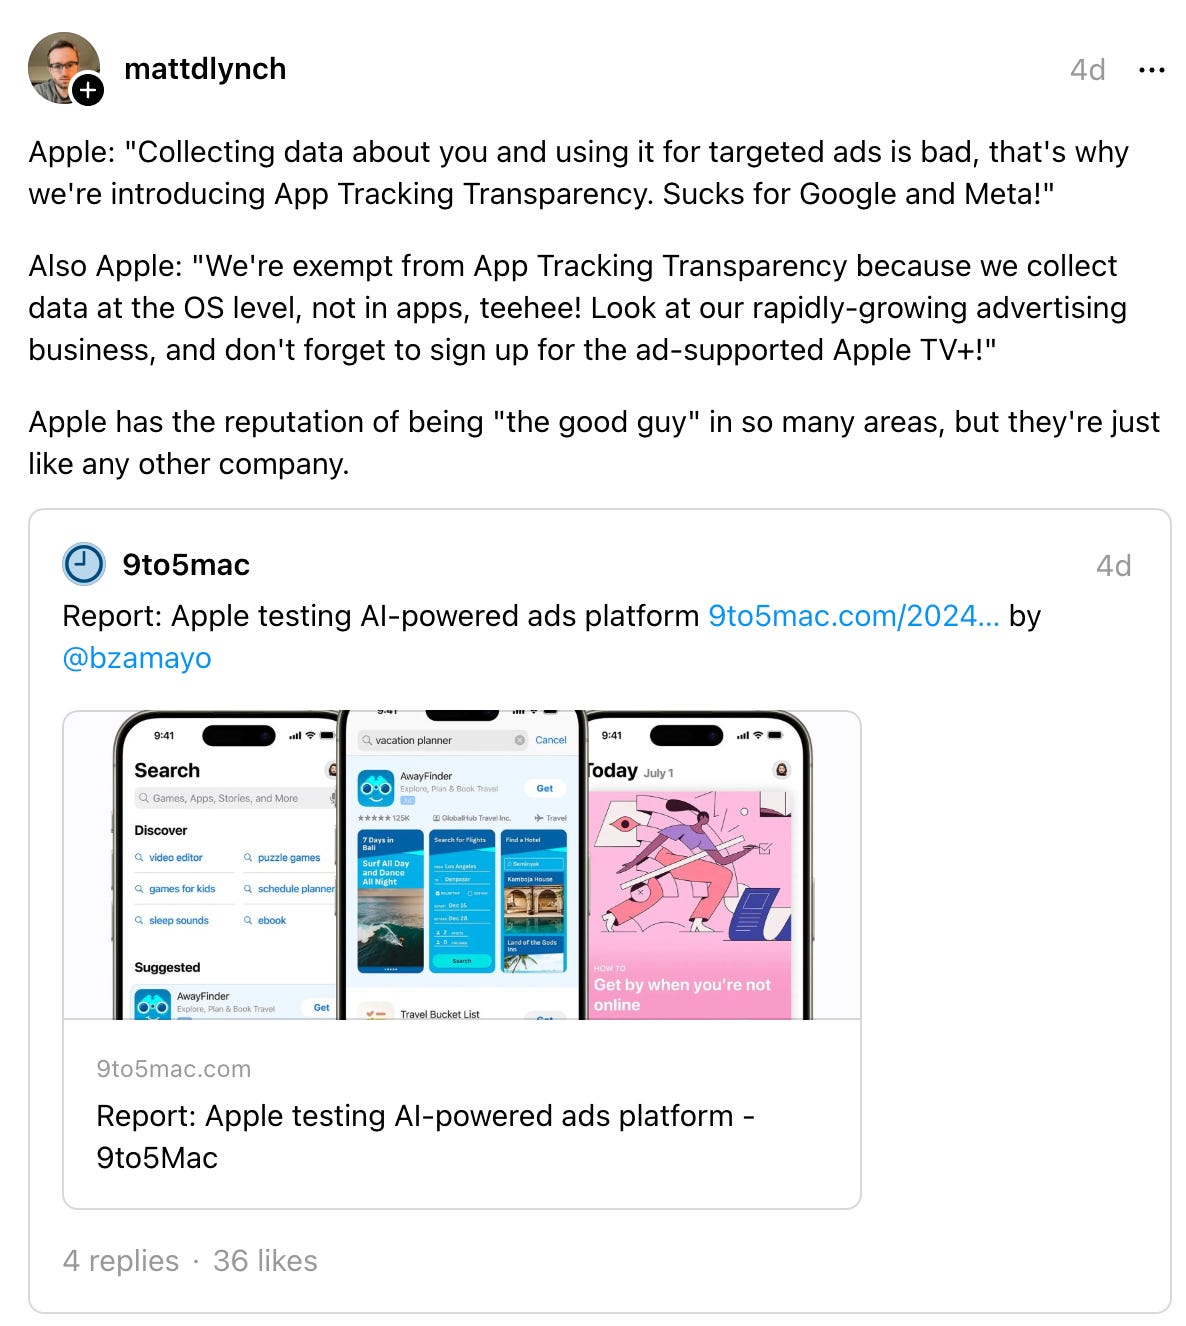 mattdlynch 4d Apple: "Collecting data about you and using it for targeted ads is bad, that's why we're introducing App Tracking Transparency. Sucks for Google and Meta!" Also Apple: "We're exempt from App Tracking Transparency because we collect data at the OS level, not in apps, teehee! Look at our rapidly-growing advertising business, and don't forget to sign up for the ad-supported Apple TV+!" Apple has the reputation of being "the good guy" in so many areas, but they're just like any other company. 9to5mac 4d Report: Apple testing AI-powered ads platform - 9to5Mac 9to5mac.com Report: Apple testing AI-powered ads platform - 9to5Mac 4  replies  · 